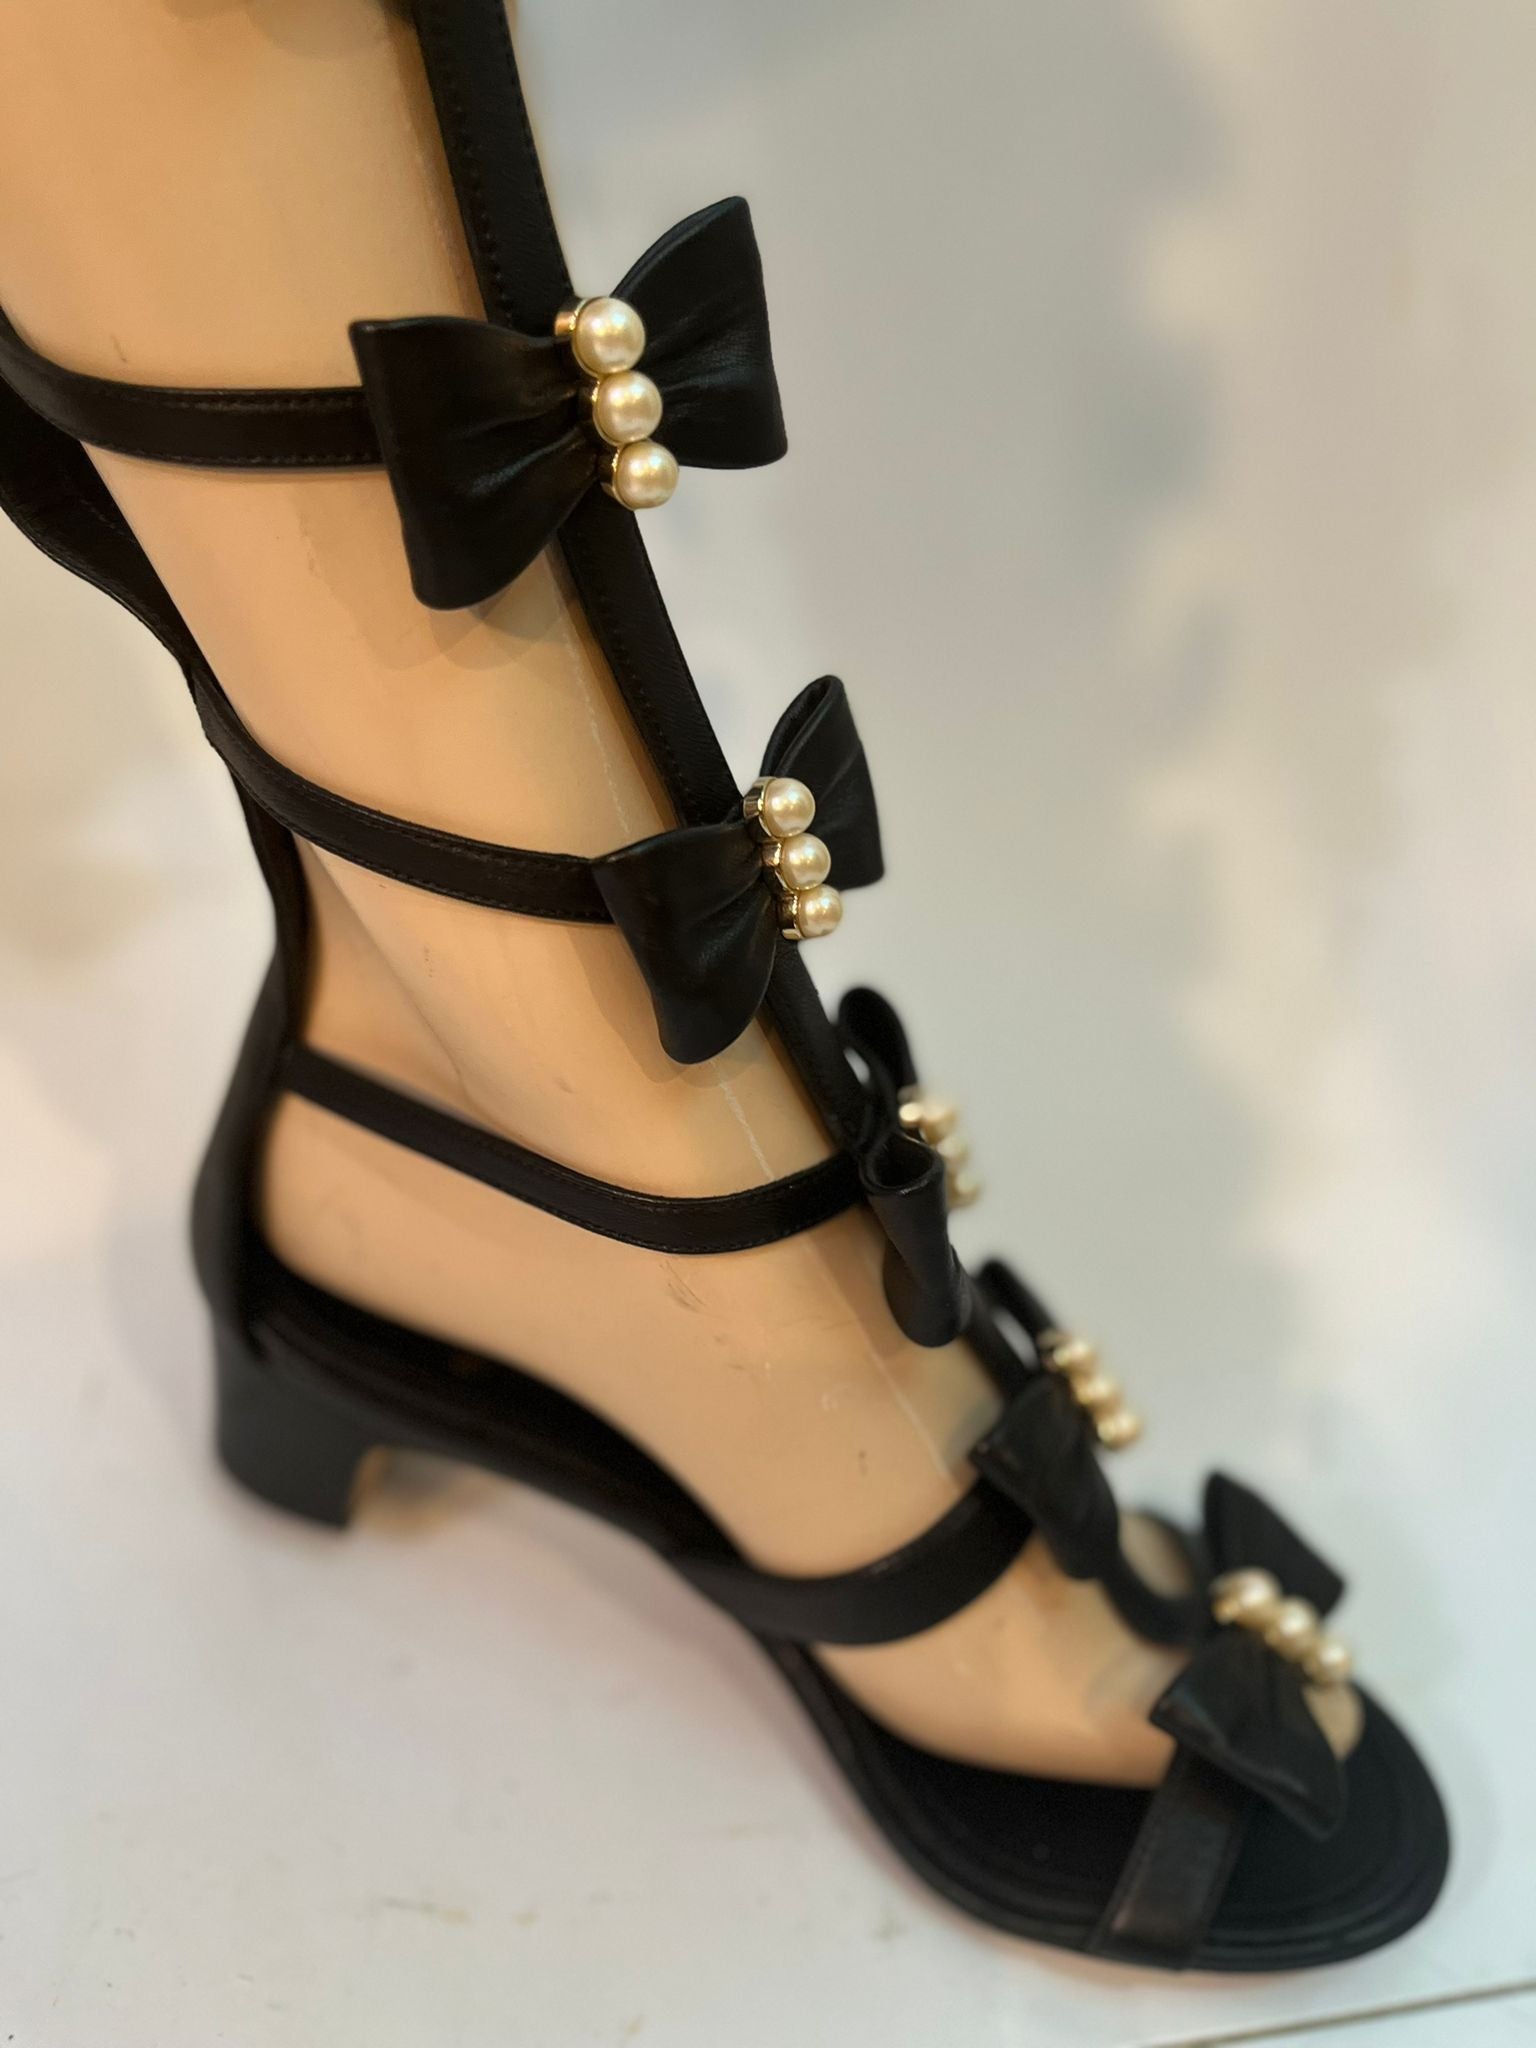 Chanel 16S 2016 Summer Tall Gladiator Sandals w Leather Bows and